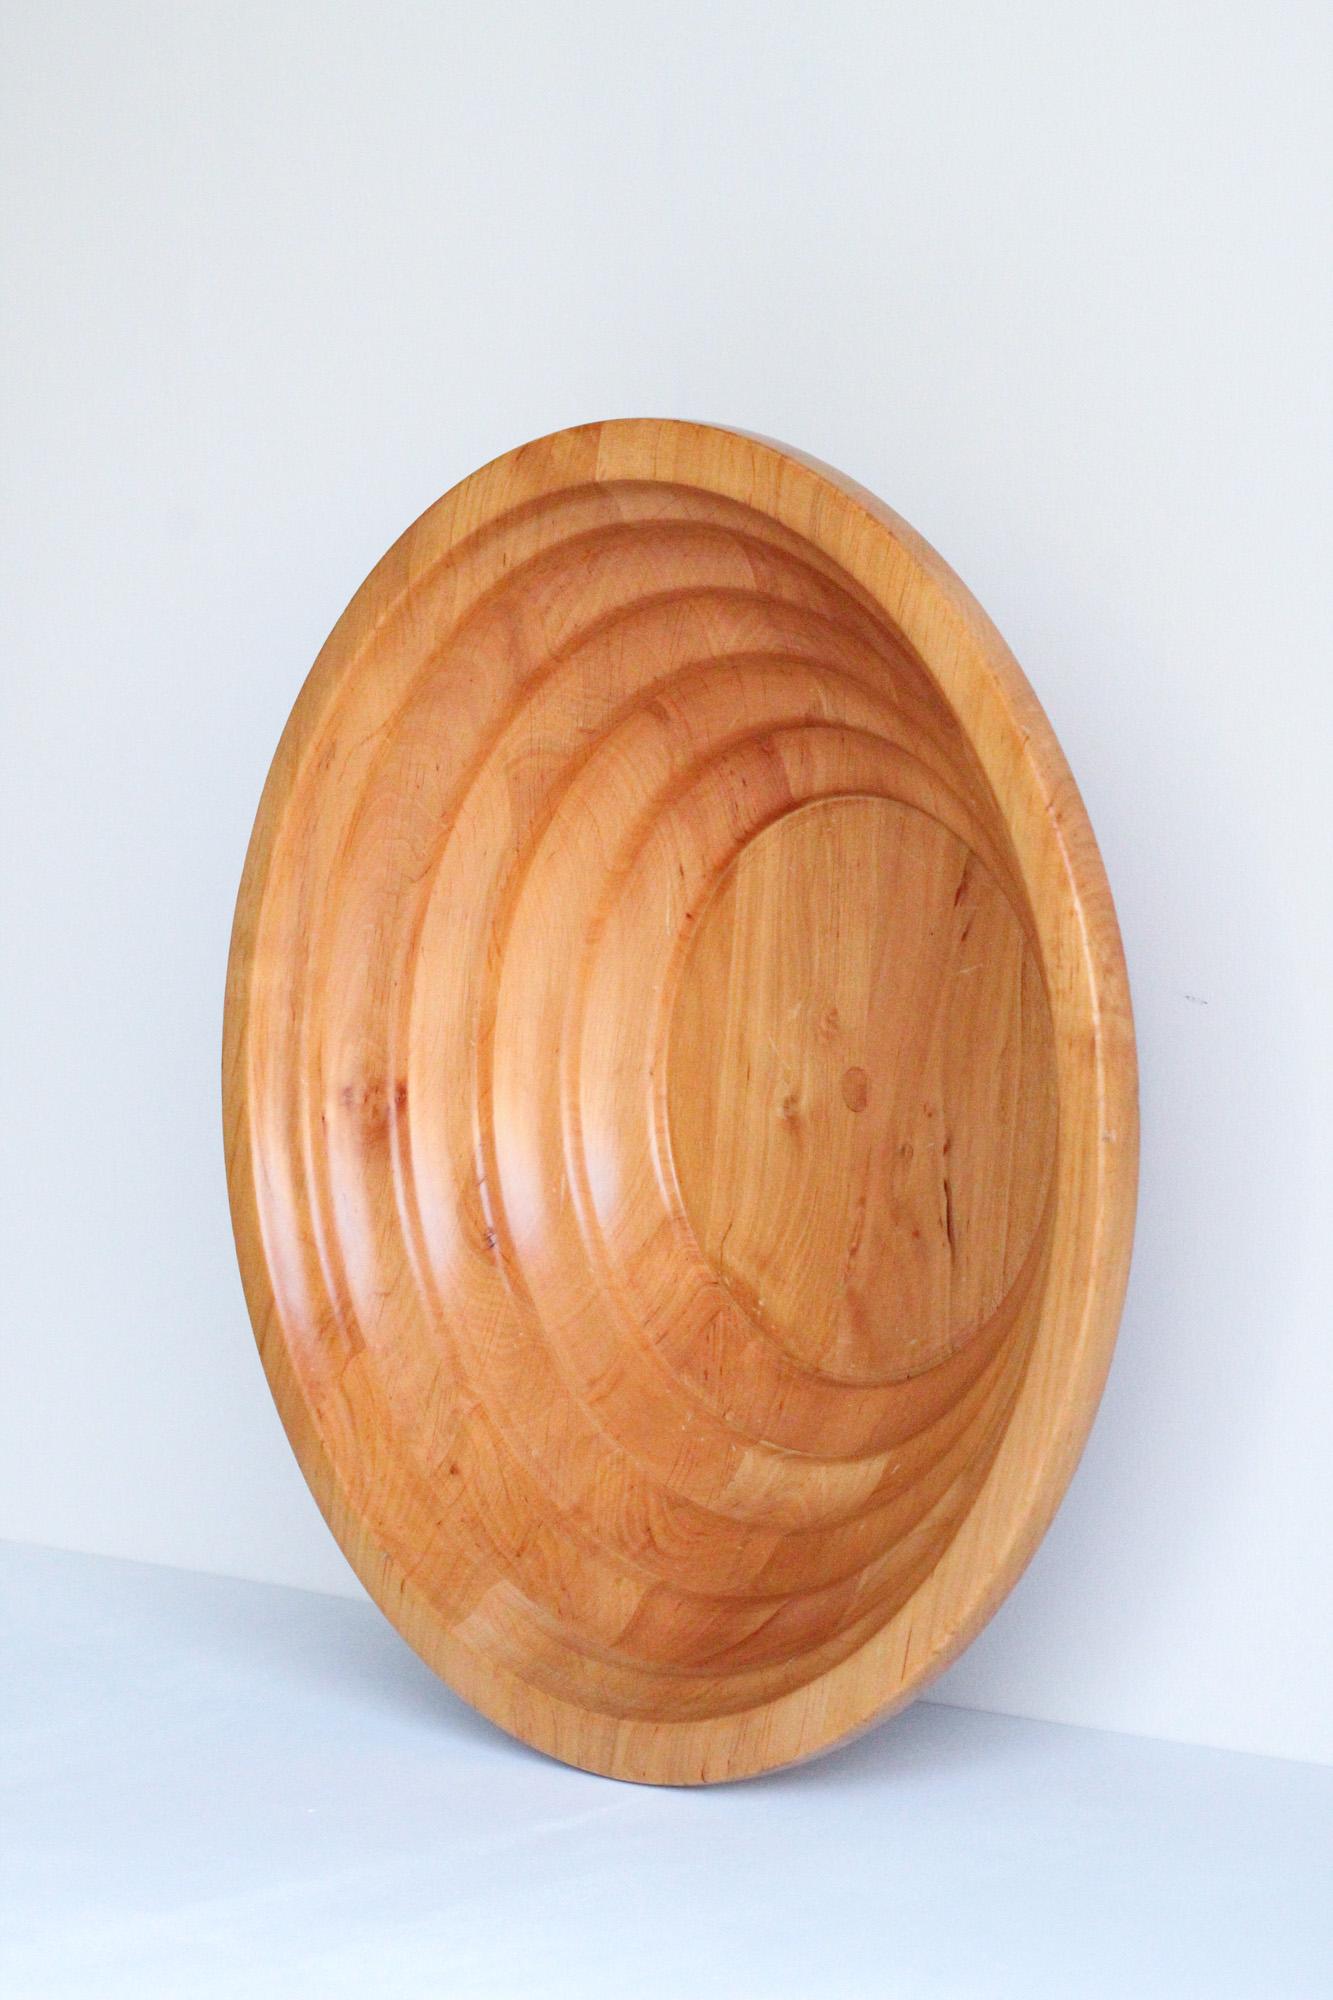 Hand-Crafted Pietro Manzoni Large Wood Bowl, Italy, 1960s